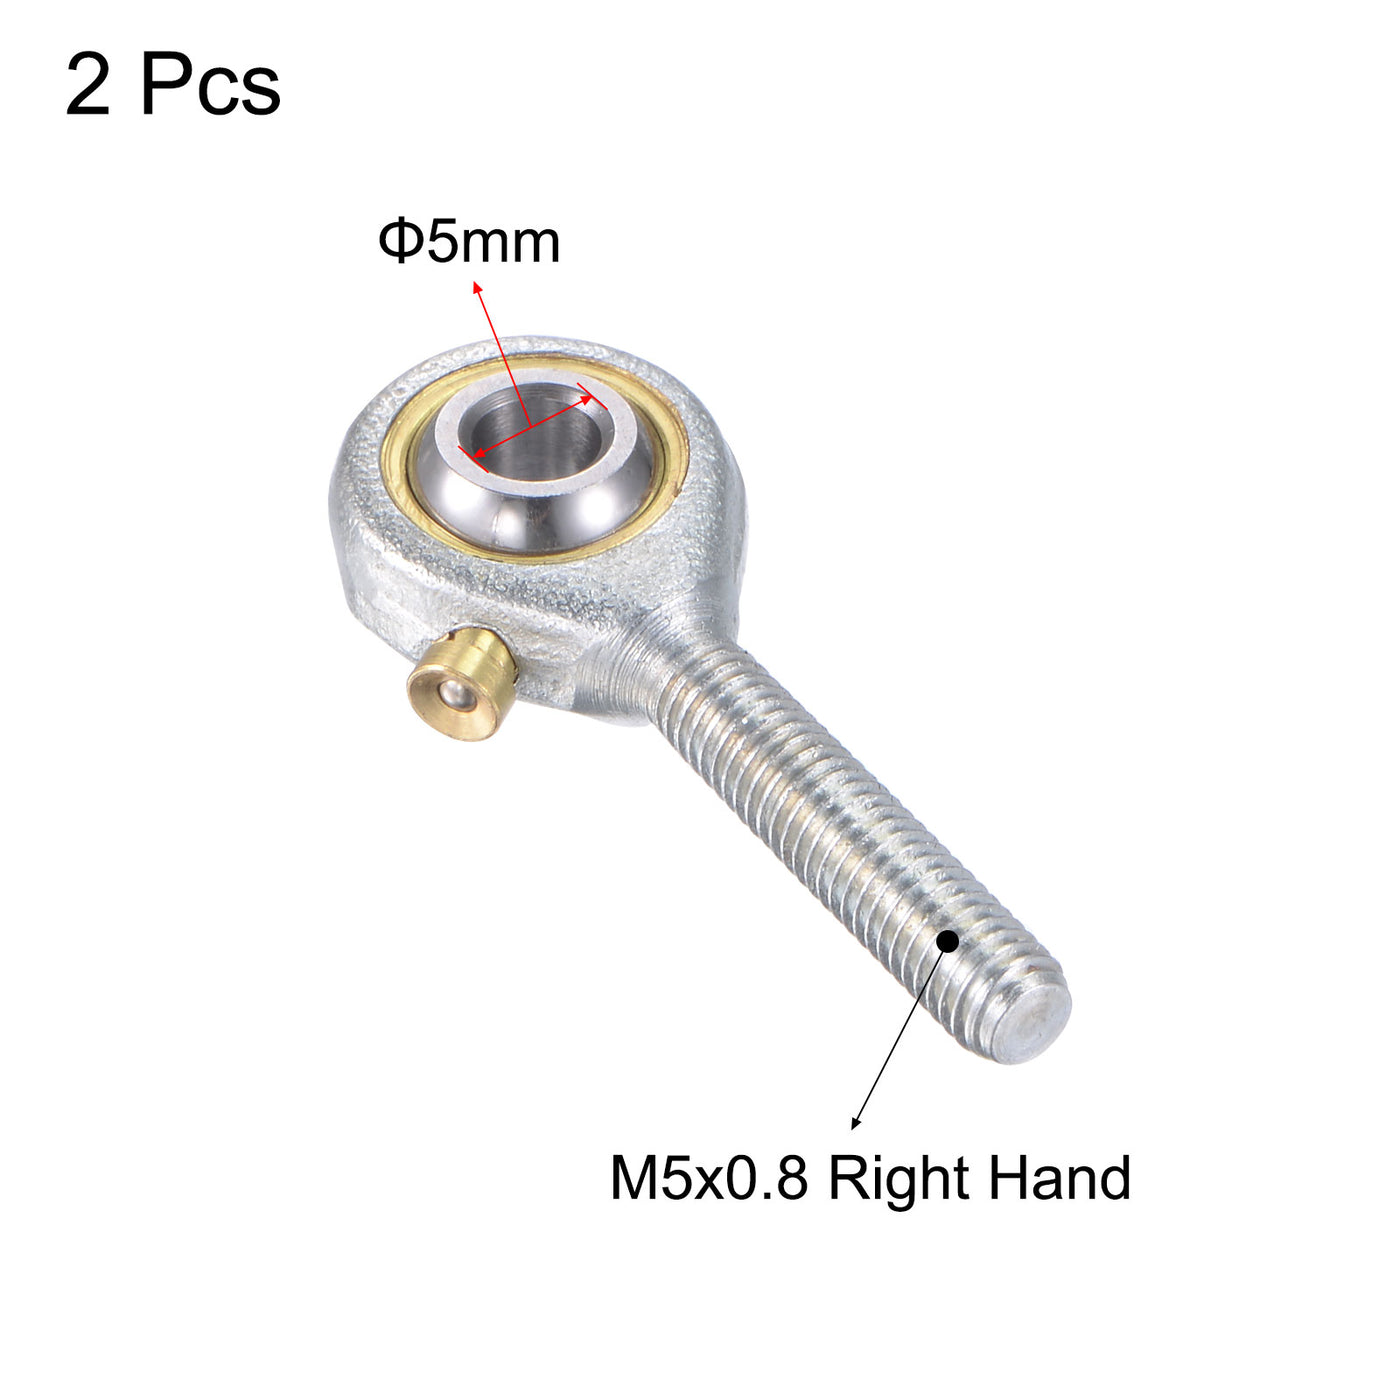 uxcell Uxcell 2pcs POS5 Rod End Bearing 5mm Bore Self-lubricated M5x0.8 Right Hand Male Thread